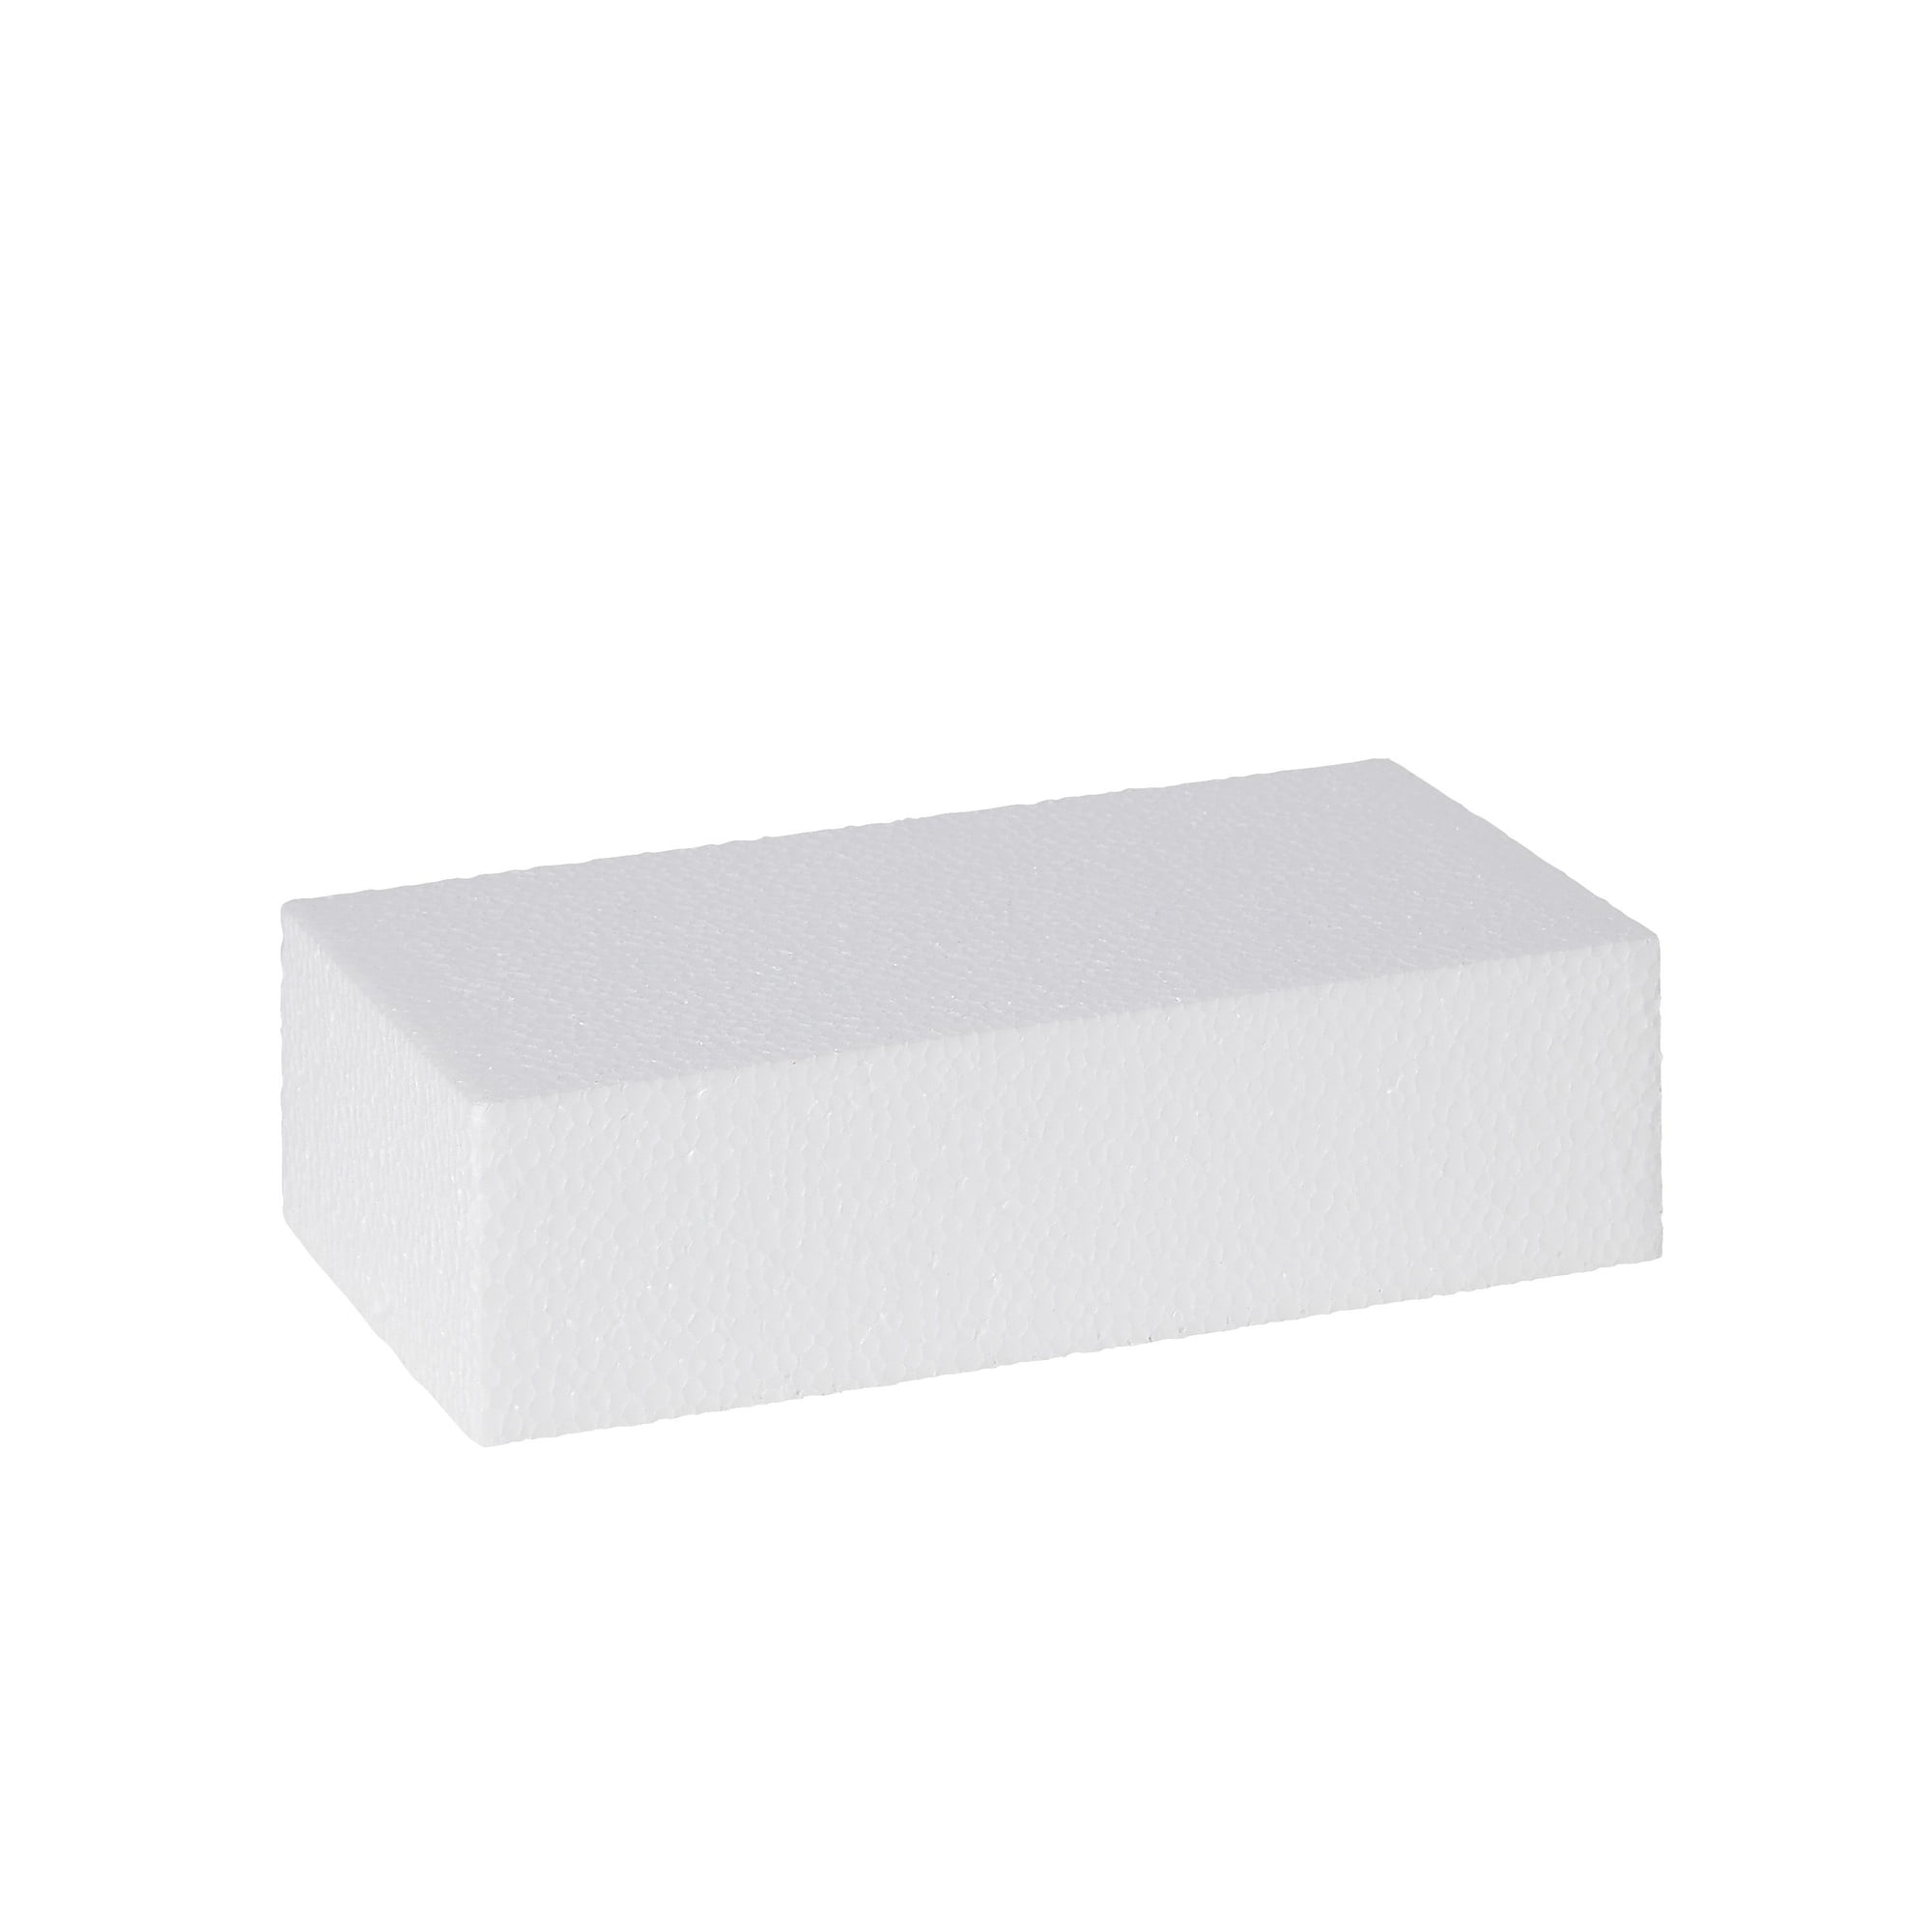 White Foam Blocks for Arts and Craft Supplies (8 x 4 x 1 in, 12 Pack), PACK  - Kroger